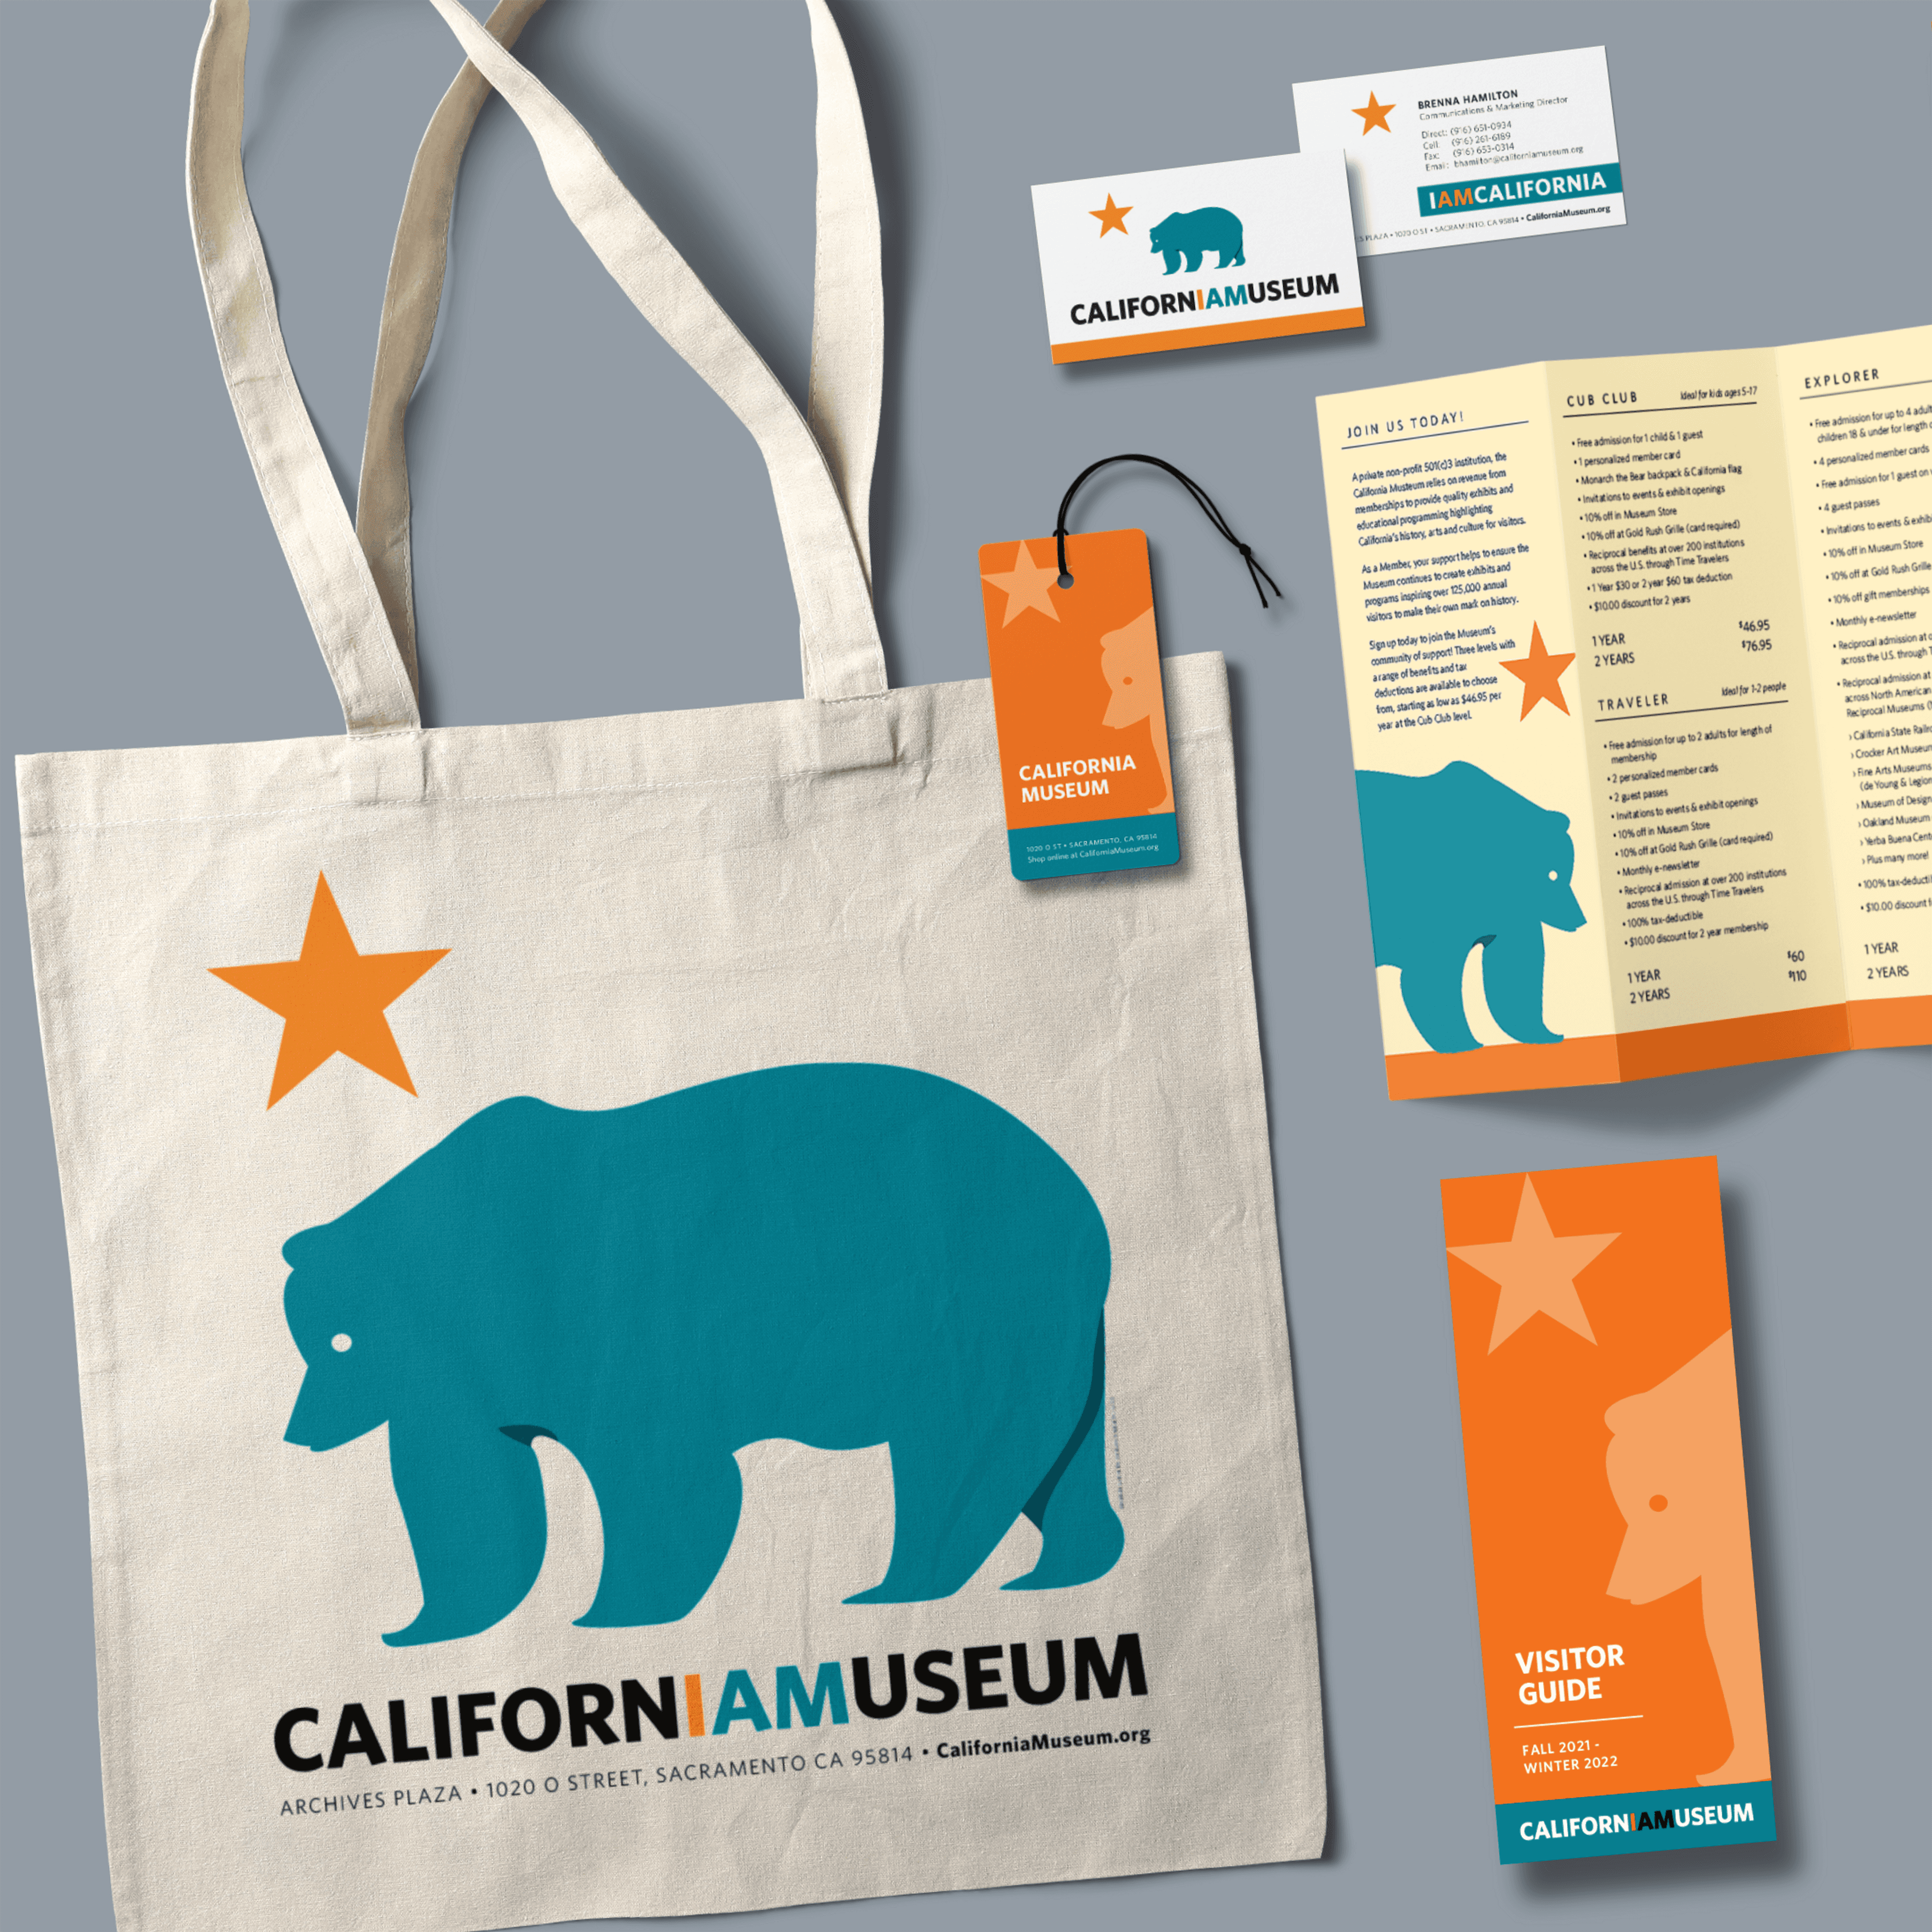 Strategy, design, copywriting, and production of branded collateral and merchandise for the California Museum by Brenna Hamilton.